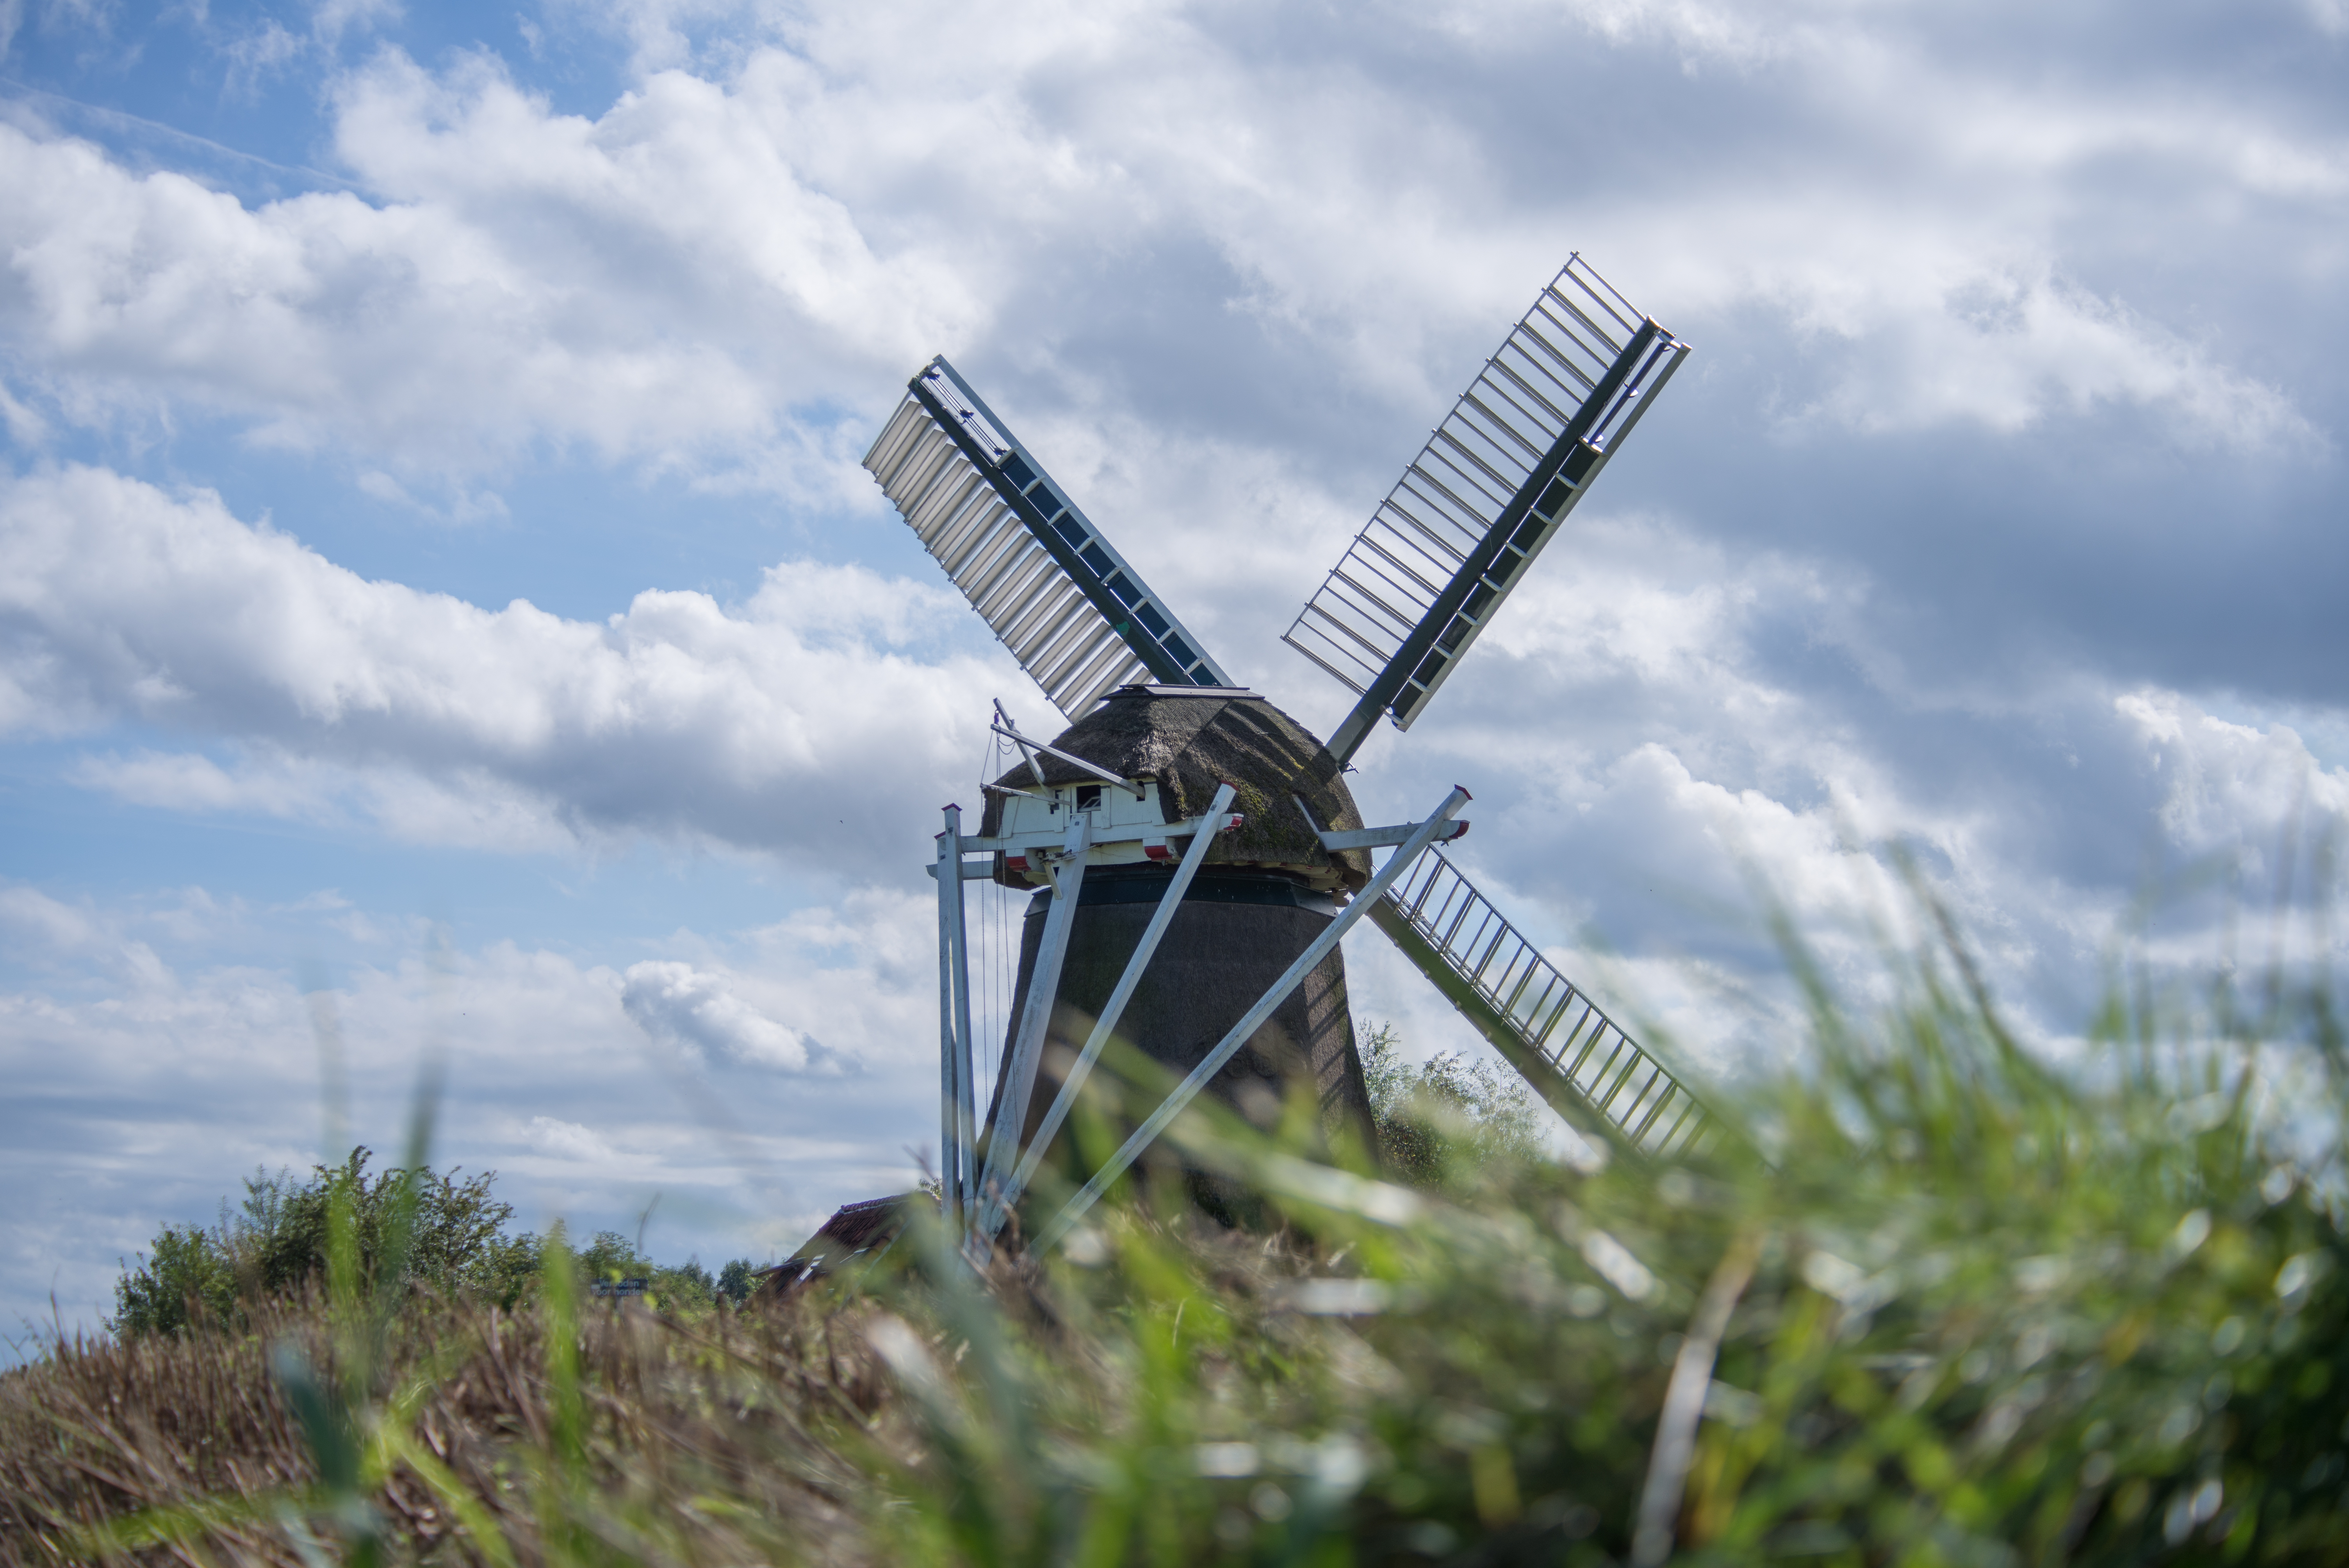 Tilting with windmills: innovations in wind energy on Windmill Day ...